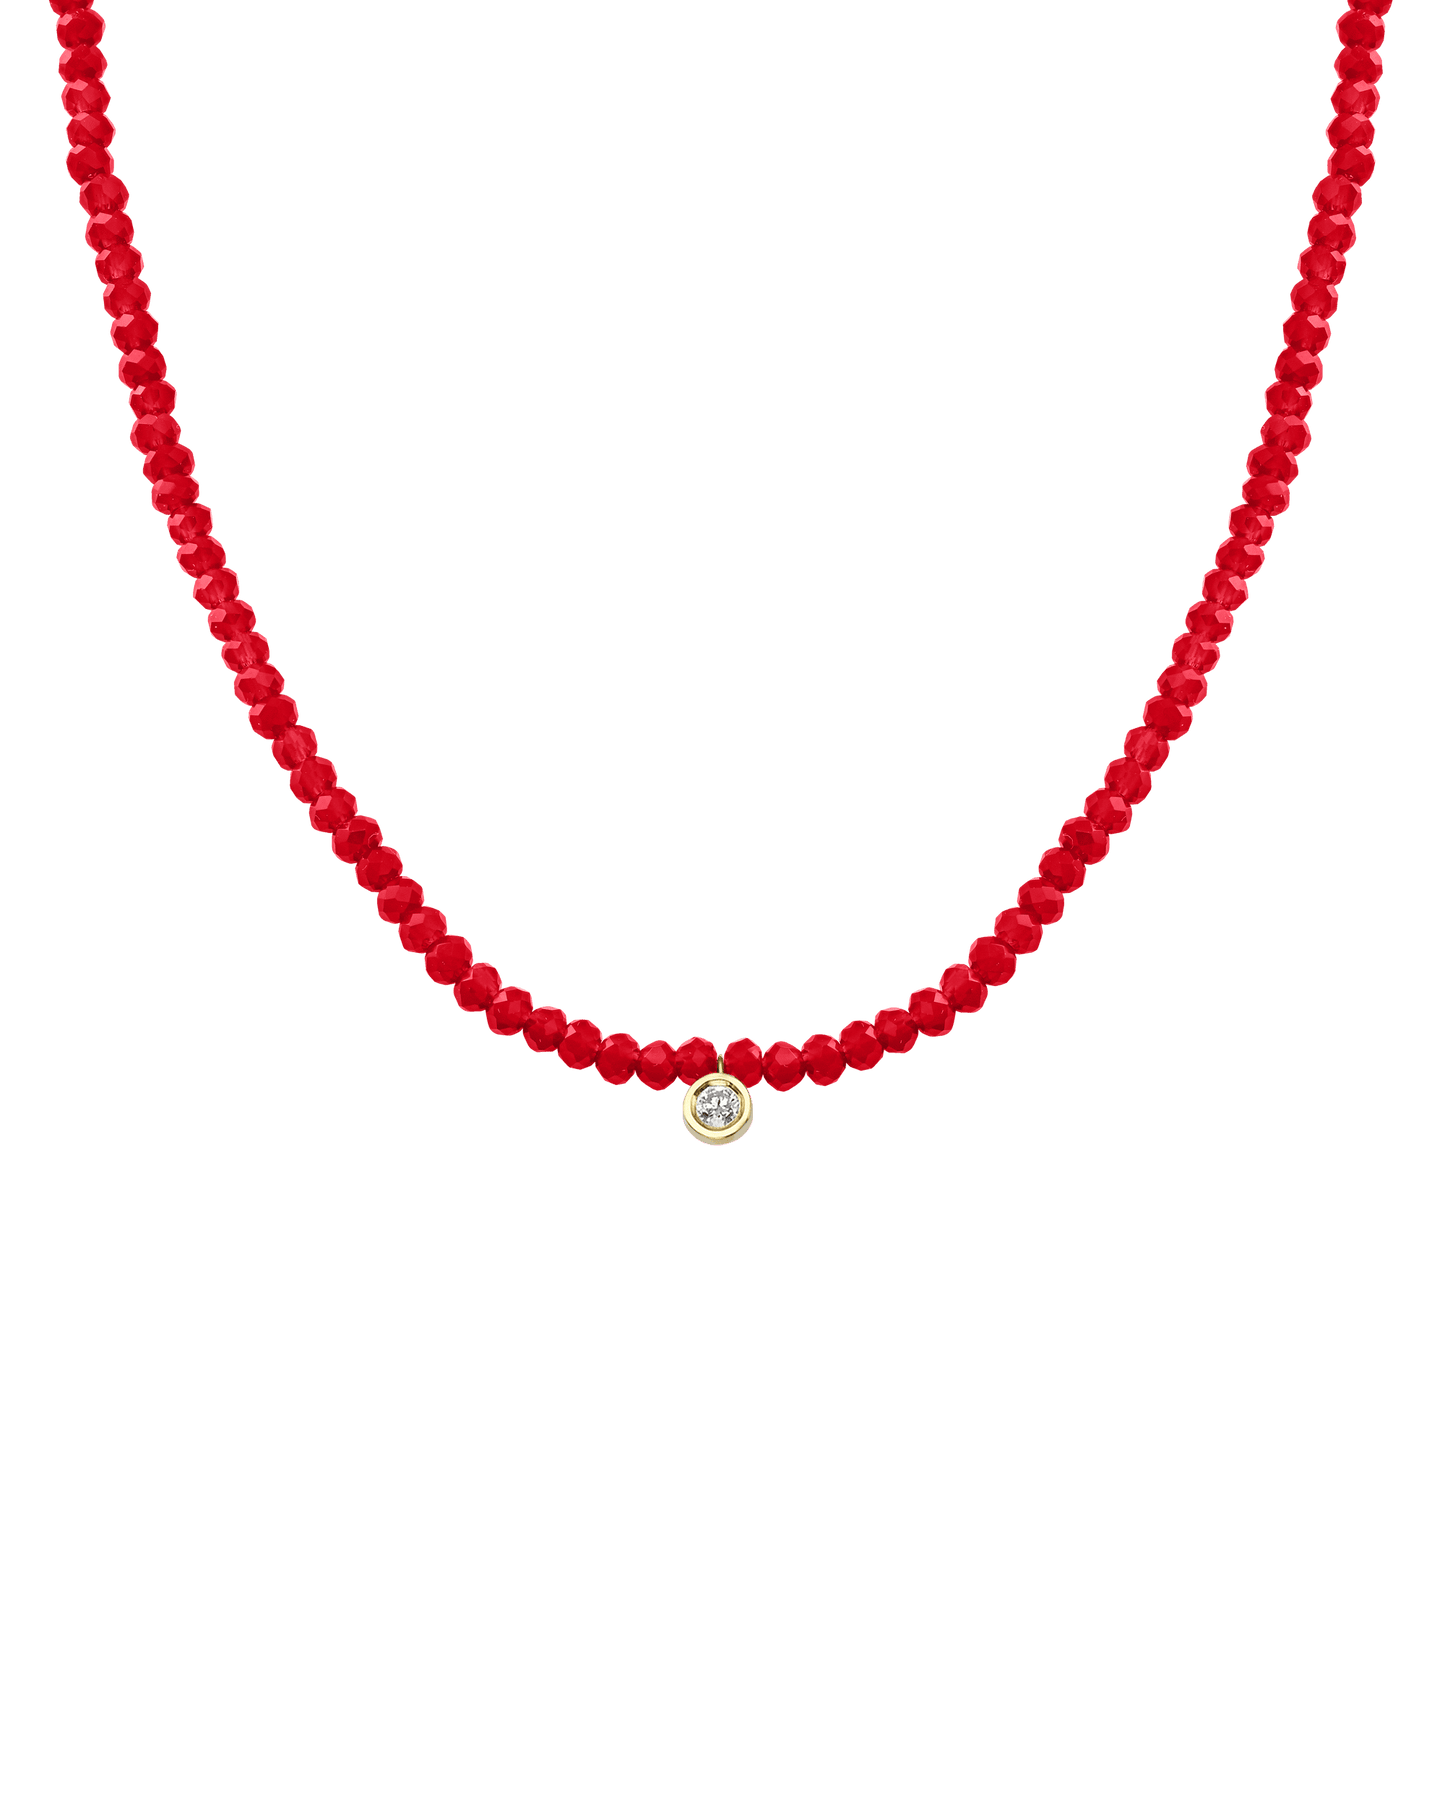 Apatite Gemstone & Diamond Necklace - 14K Yellow Gold Necklaces 14K Solid Gold Natural Red Jade Medium: 0.05ct 14"